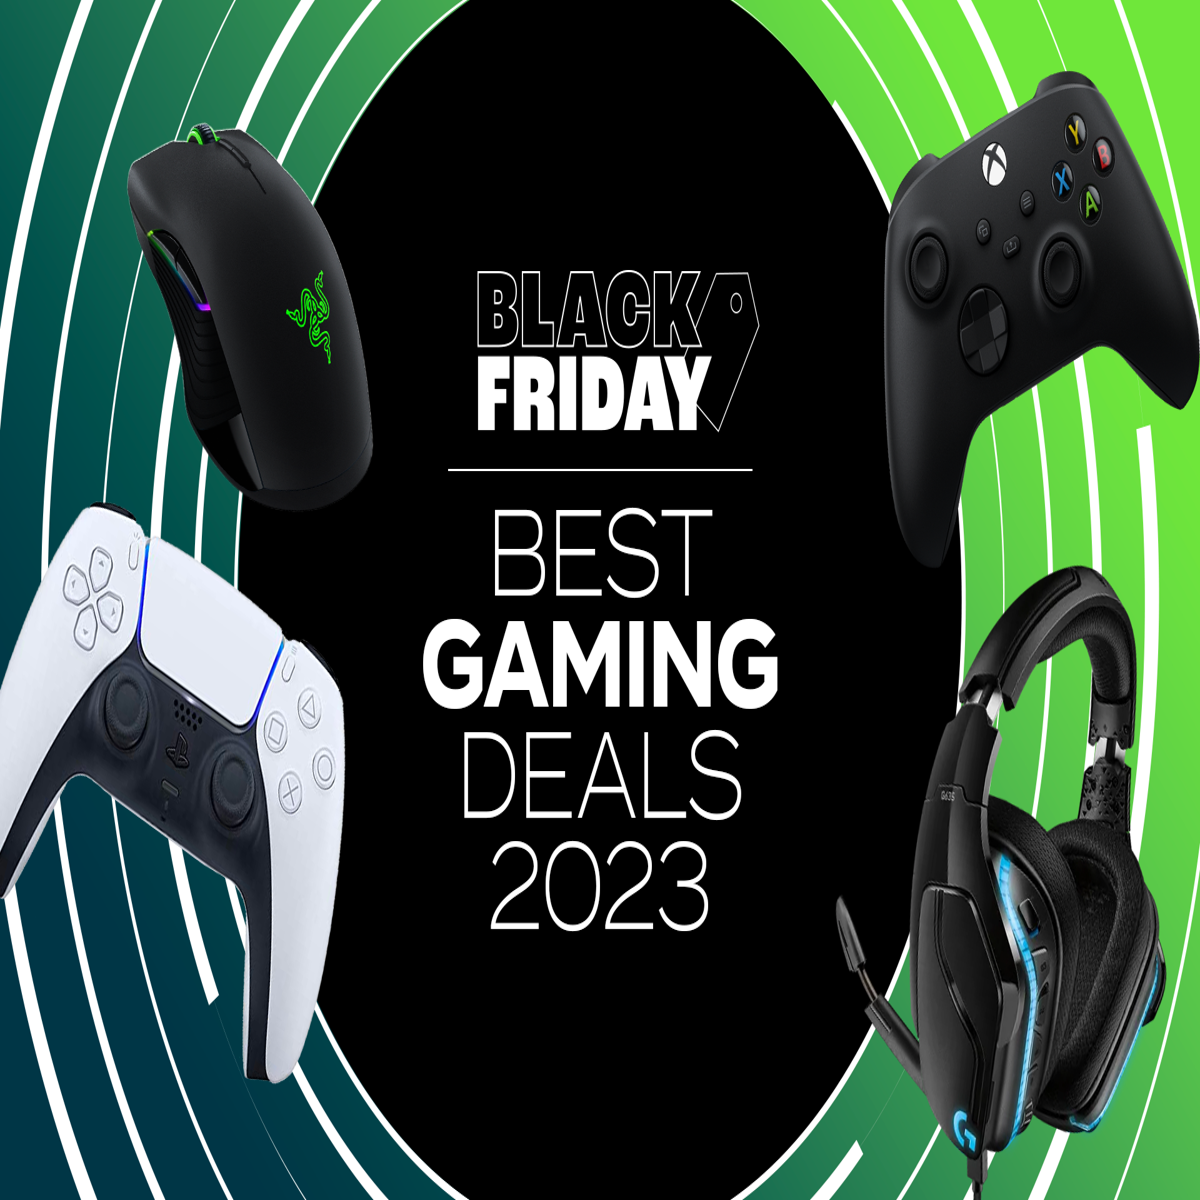 Prime Day Sale 2022: Best UK deals on FIFA 2023, PS5 accessories &  more game offers